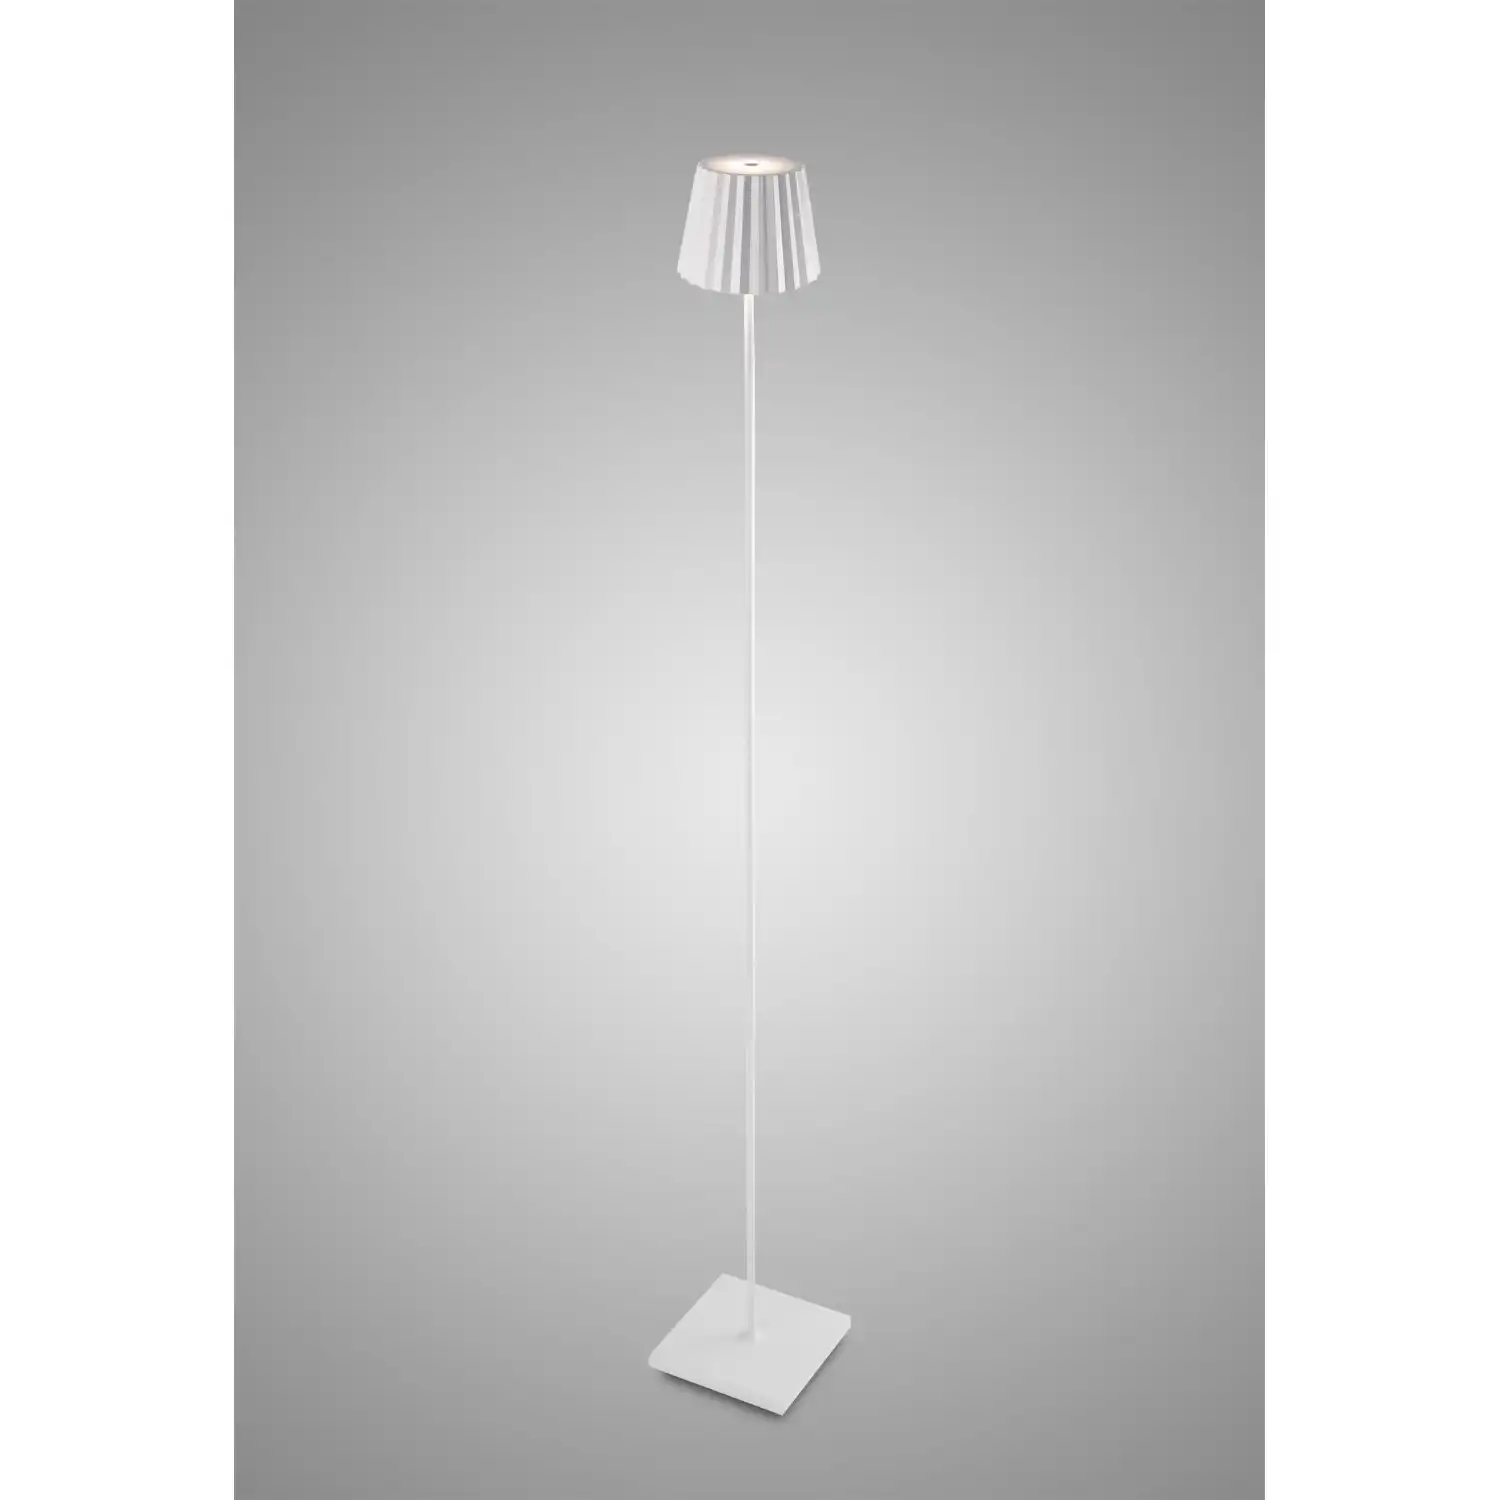 K2 Floor Lamp, 2.2W LED, 3000K, 188lm, IP54, USB Charging Cable Included, White, 3yrs Warranty